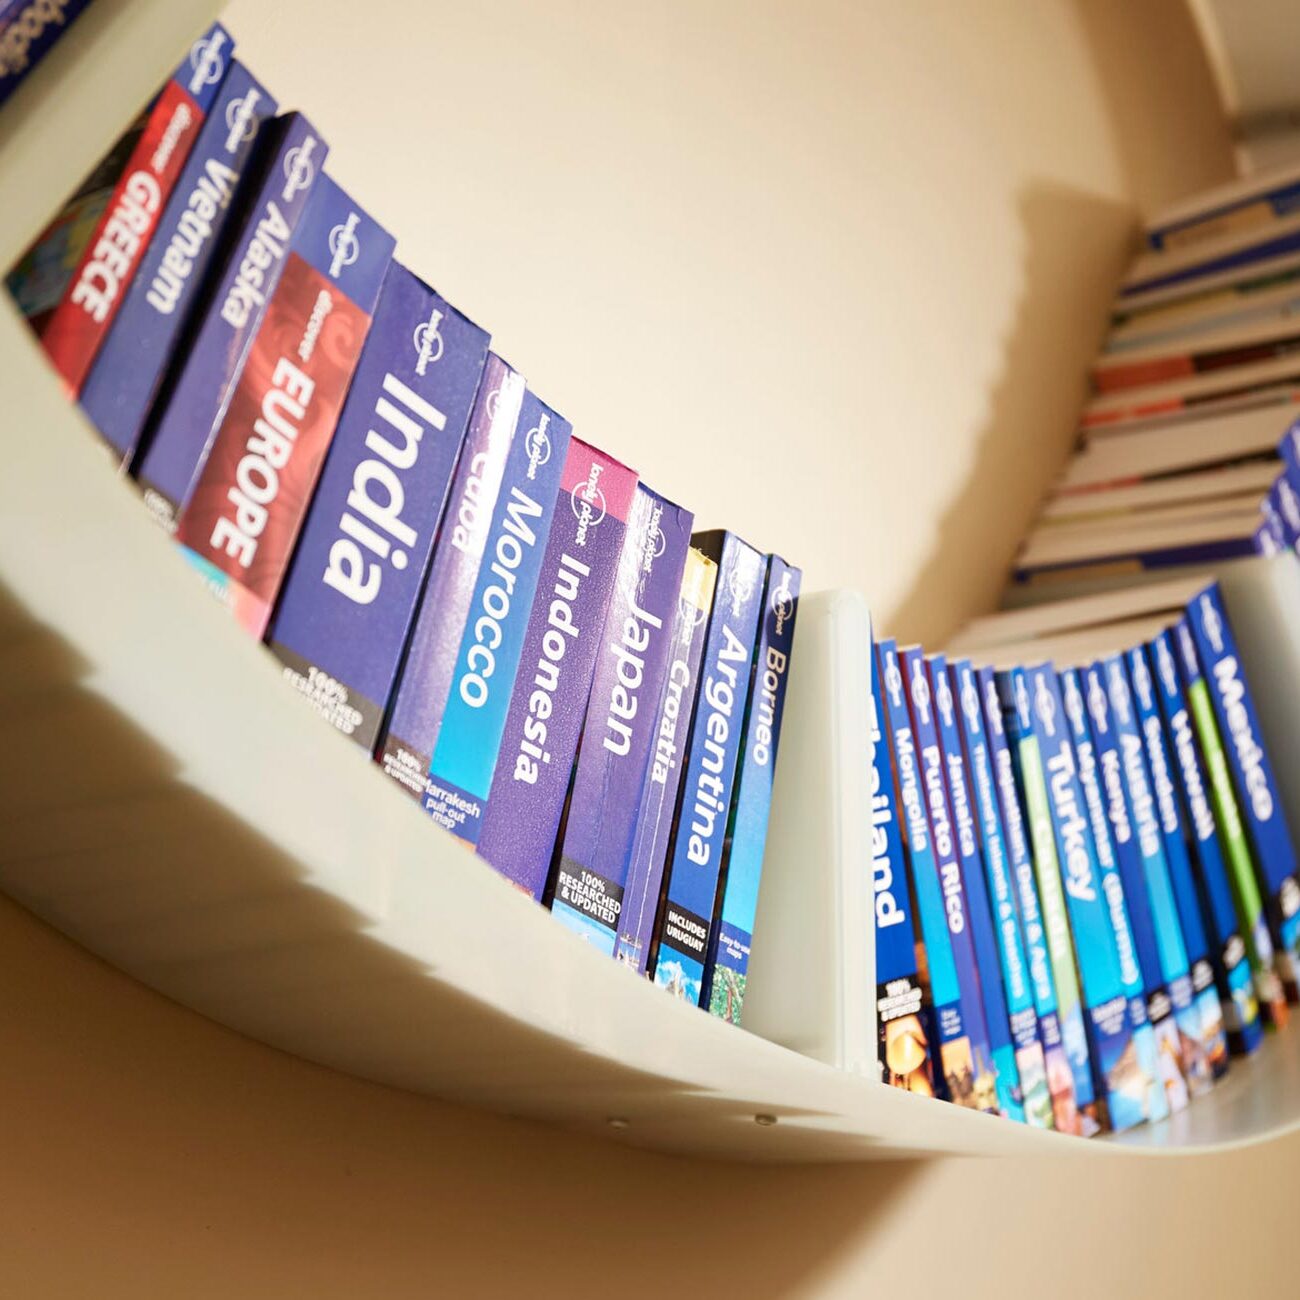 Lonely planet guides on bookshelf